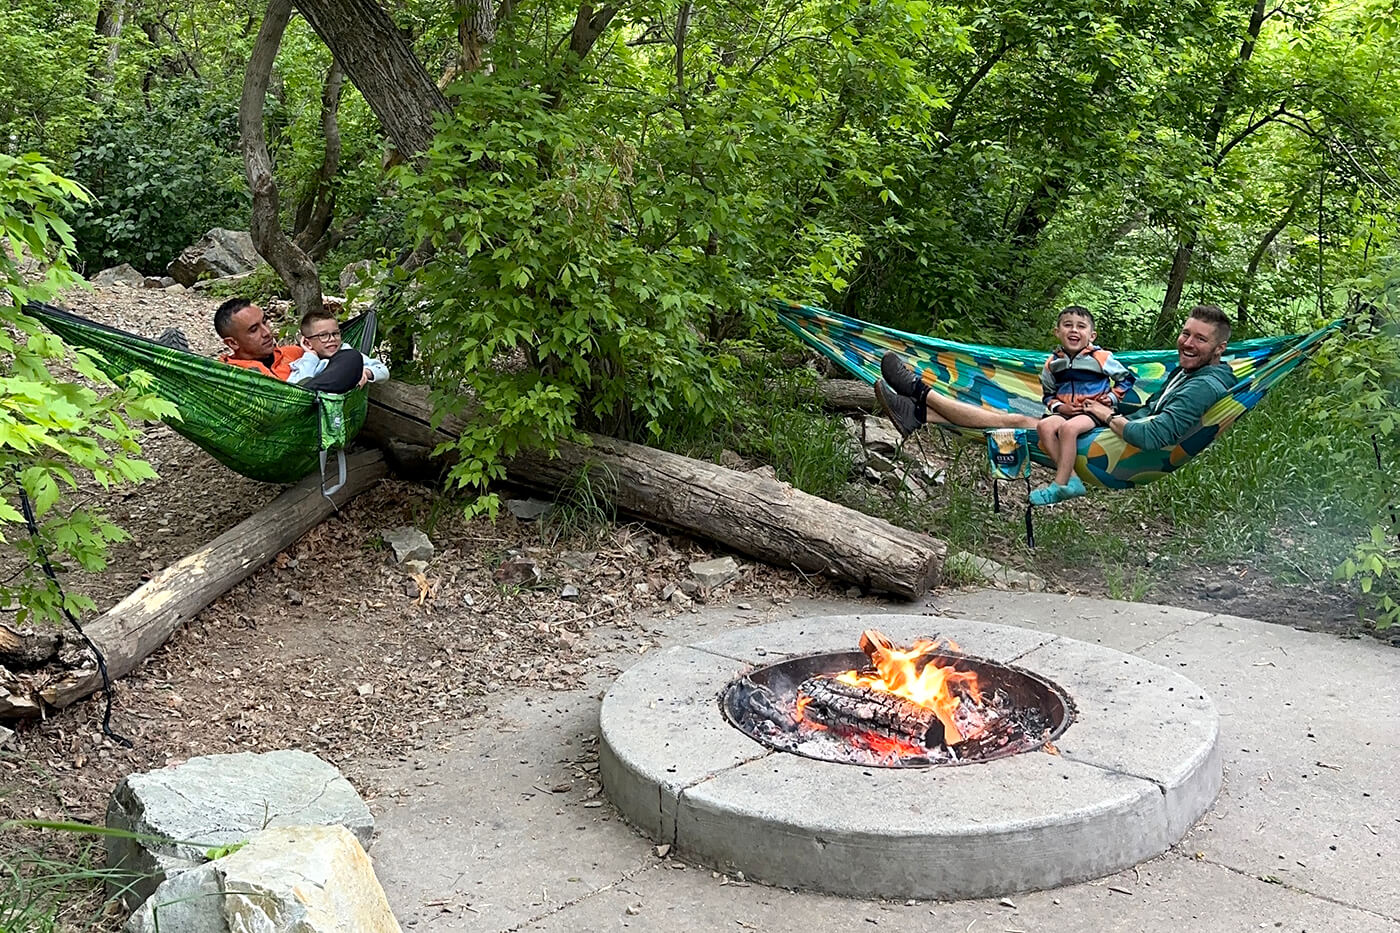 The Fontes family hammocks together around a fire pit in the woods.